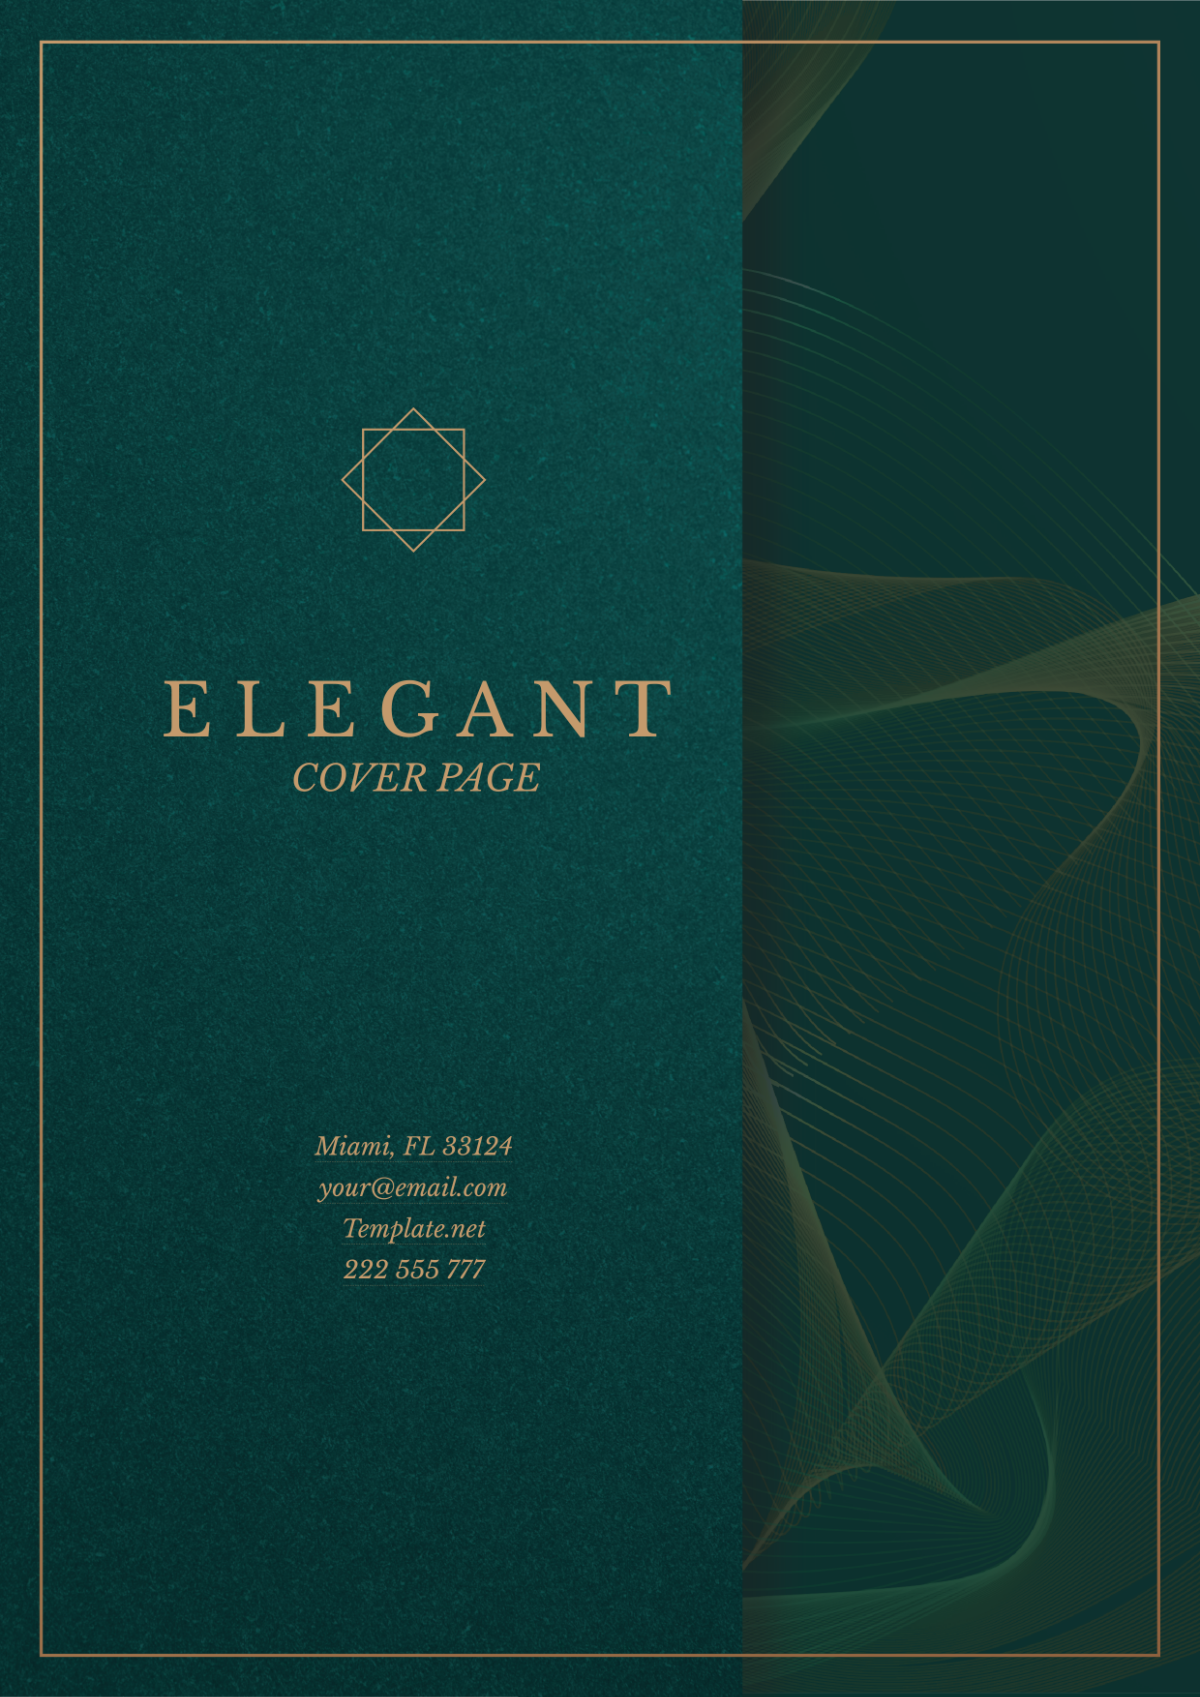 Elegant Heading Cover Page Template